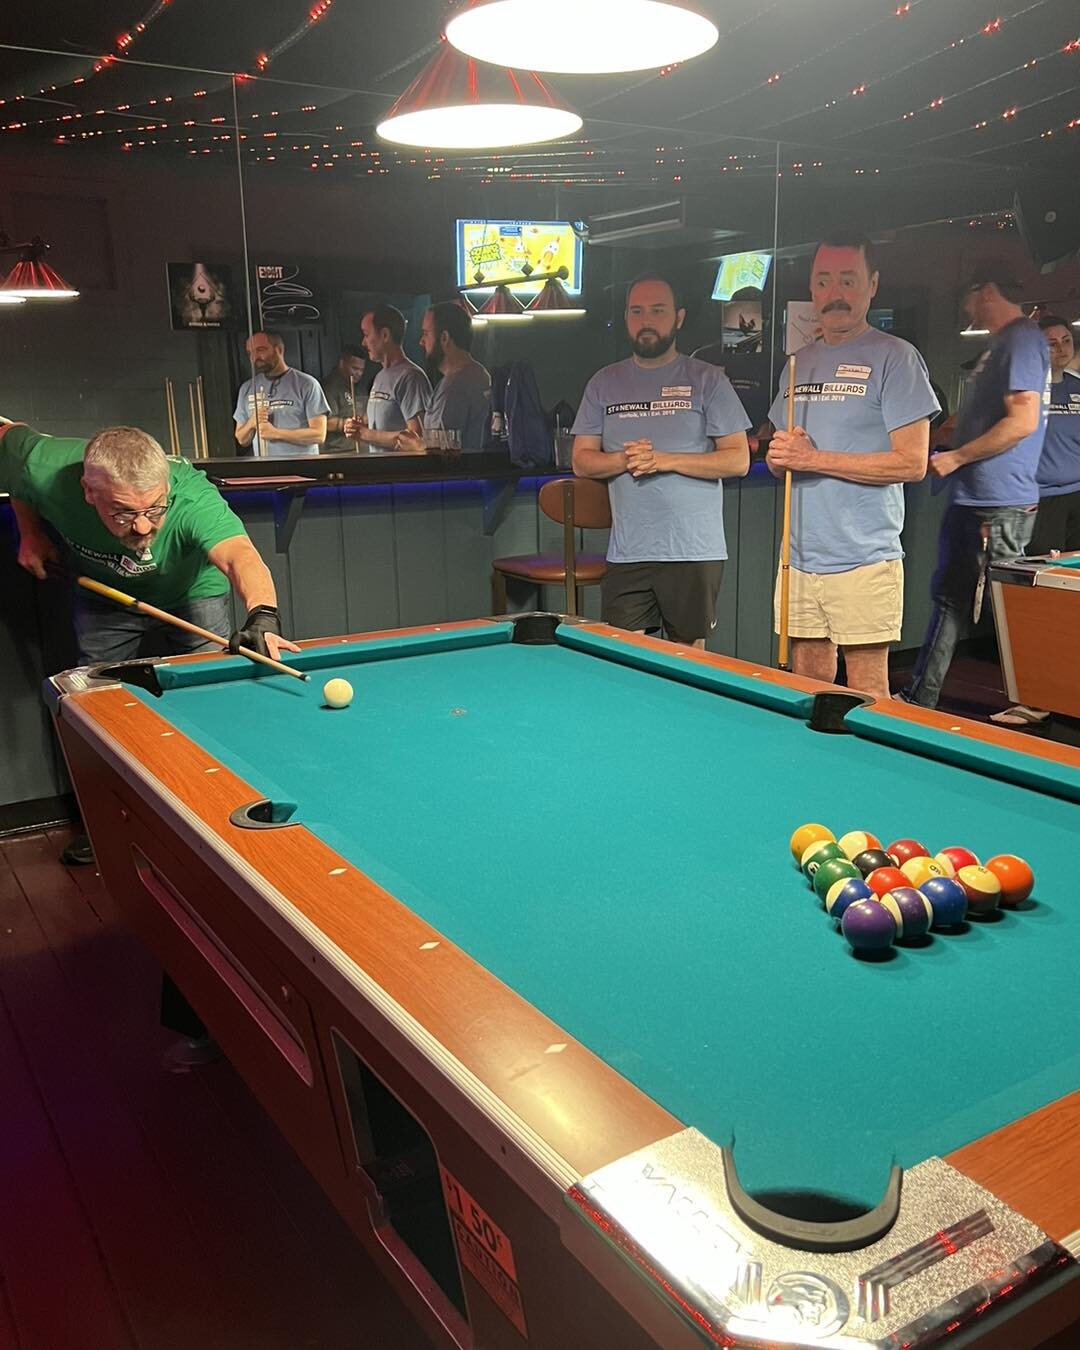 The first break of our brand new sport! 

We can not be more excited to welcome Billiards into the Stonewall Sports Norfolk family!

#stonewallsportsnorfolk #stonewallsports